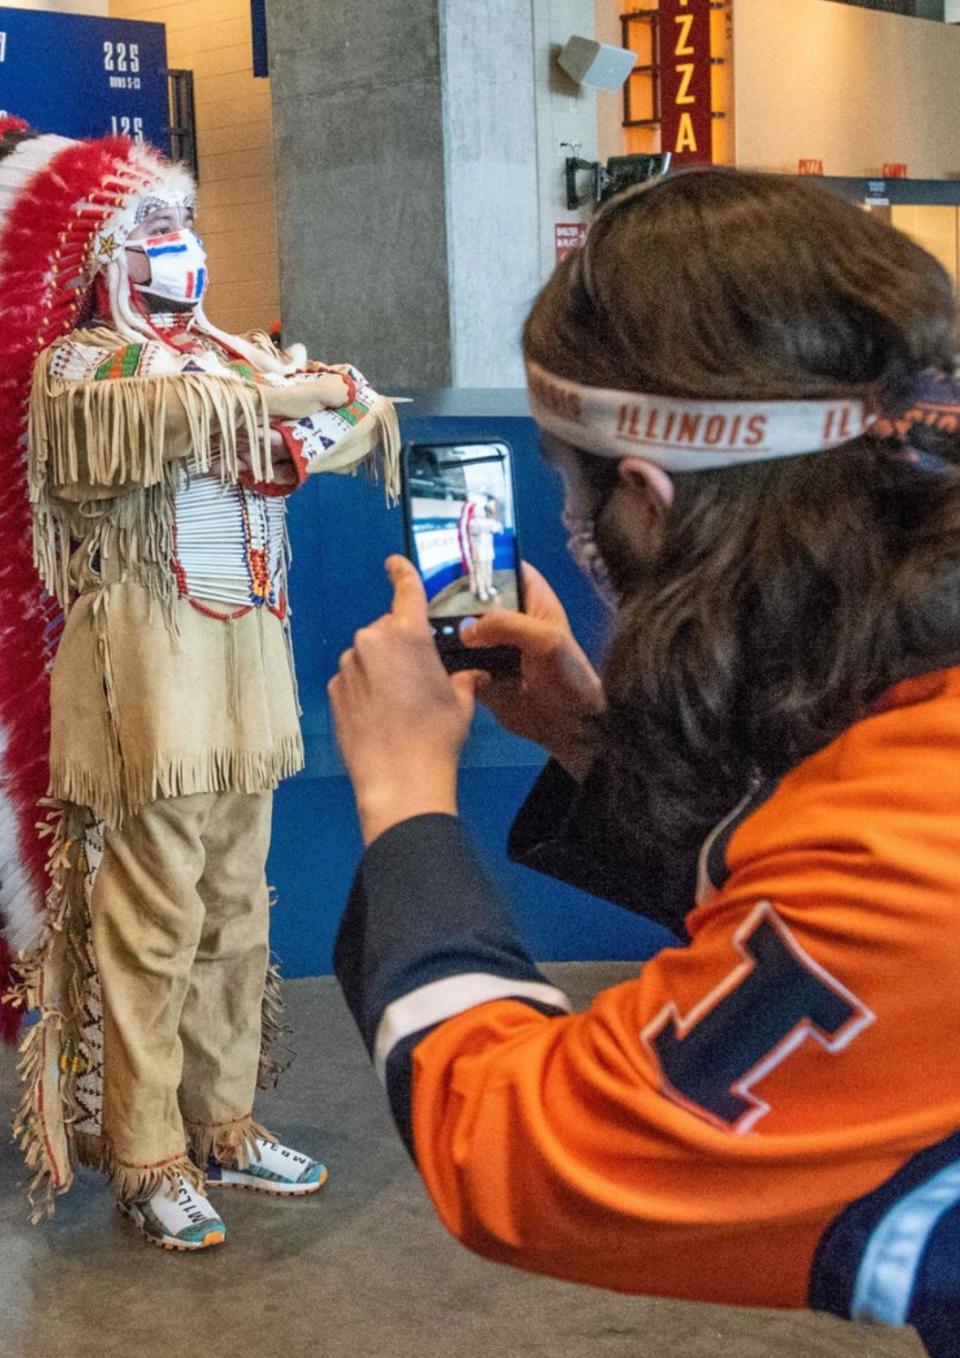 Still from the film of a person photographing a white person dressed as a Native American sports mascot.